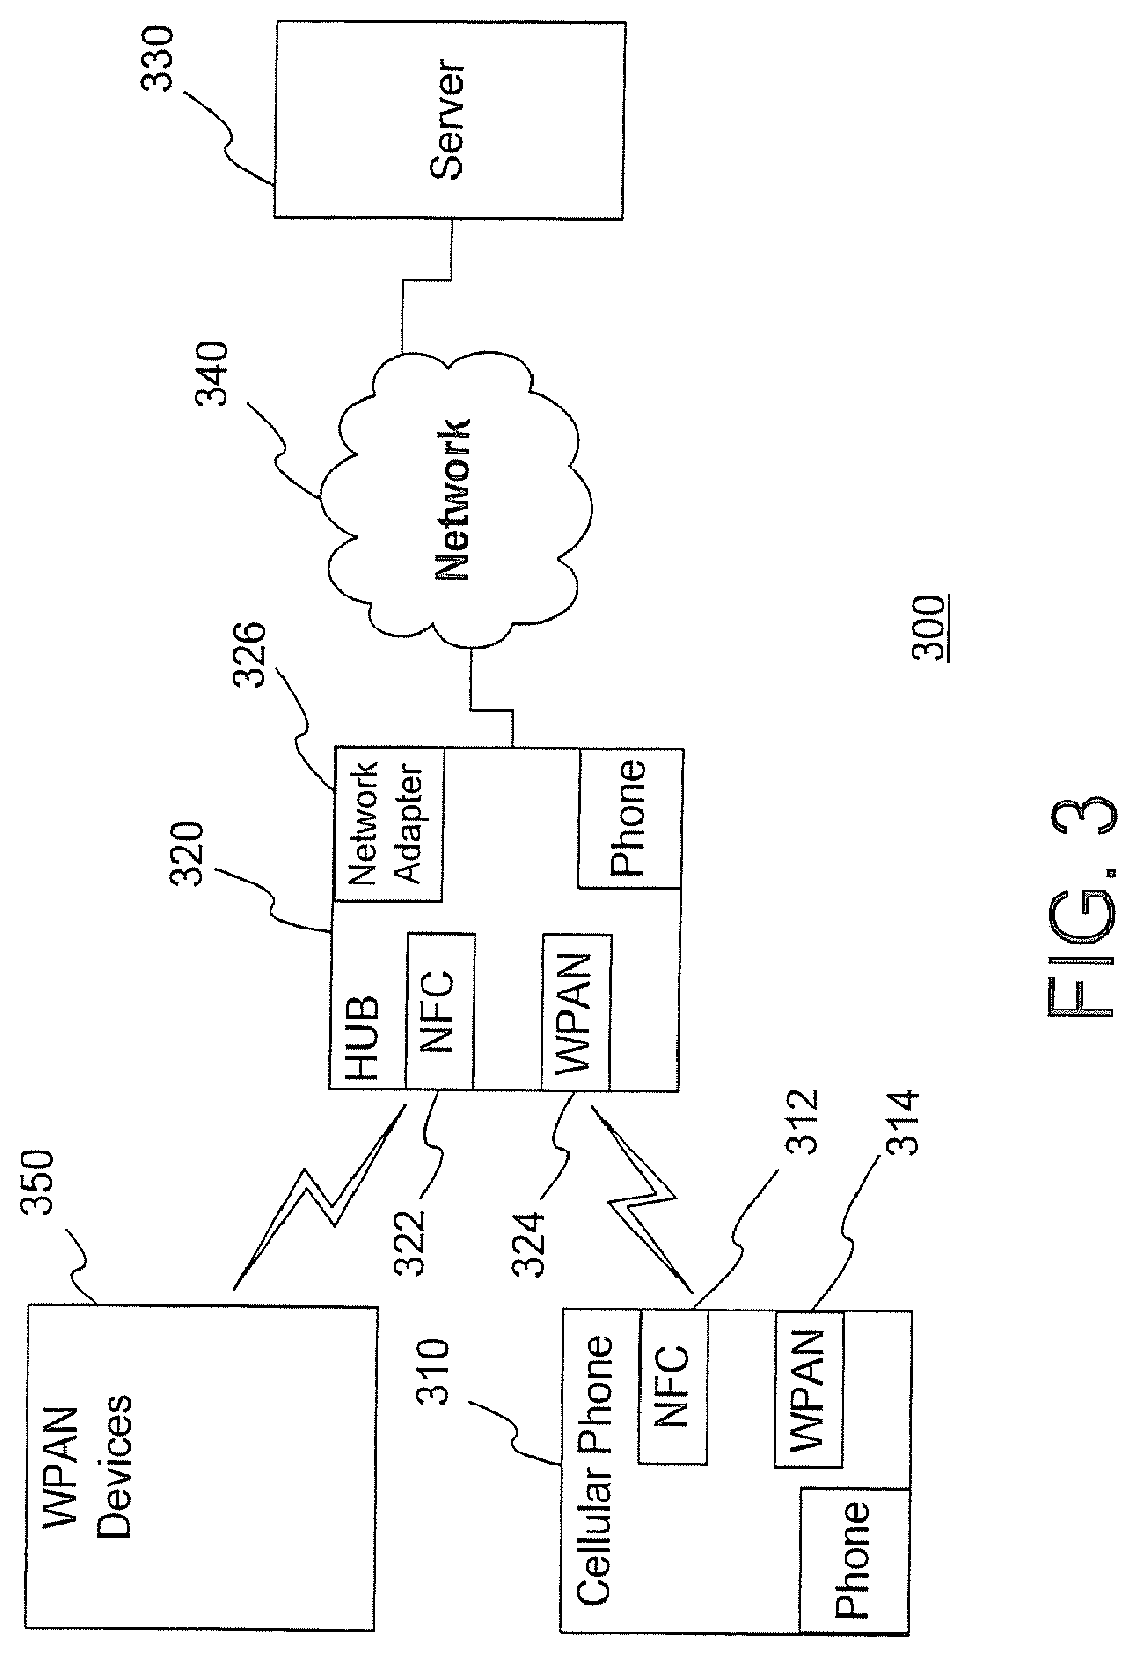 Method and System for Efficient Communication